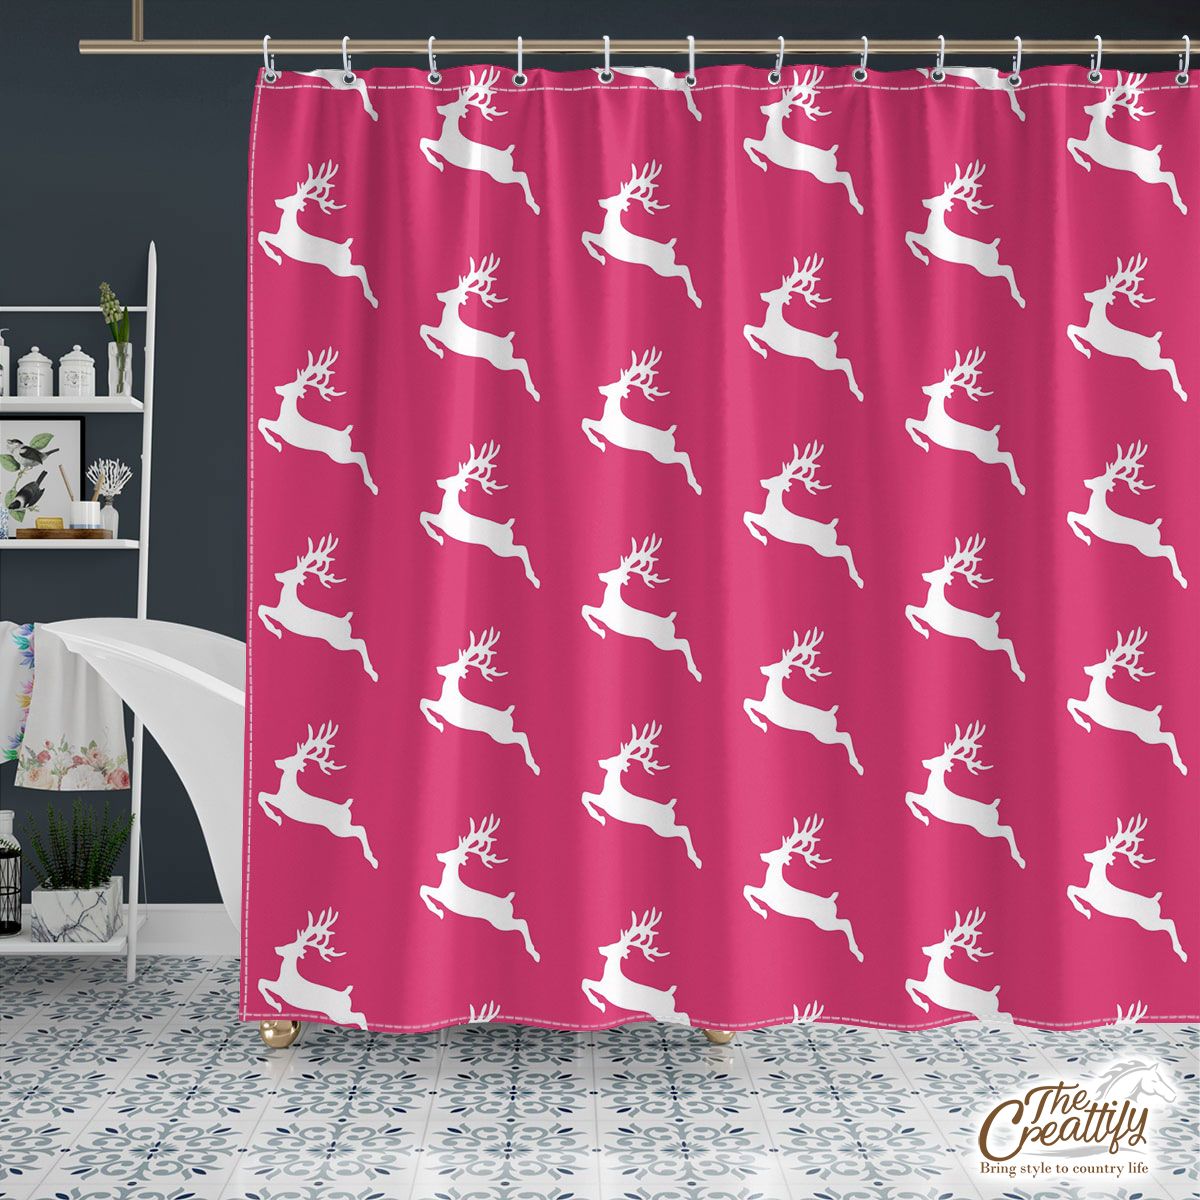 Pink And White Christmas Reindeeer Shower Curtain